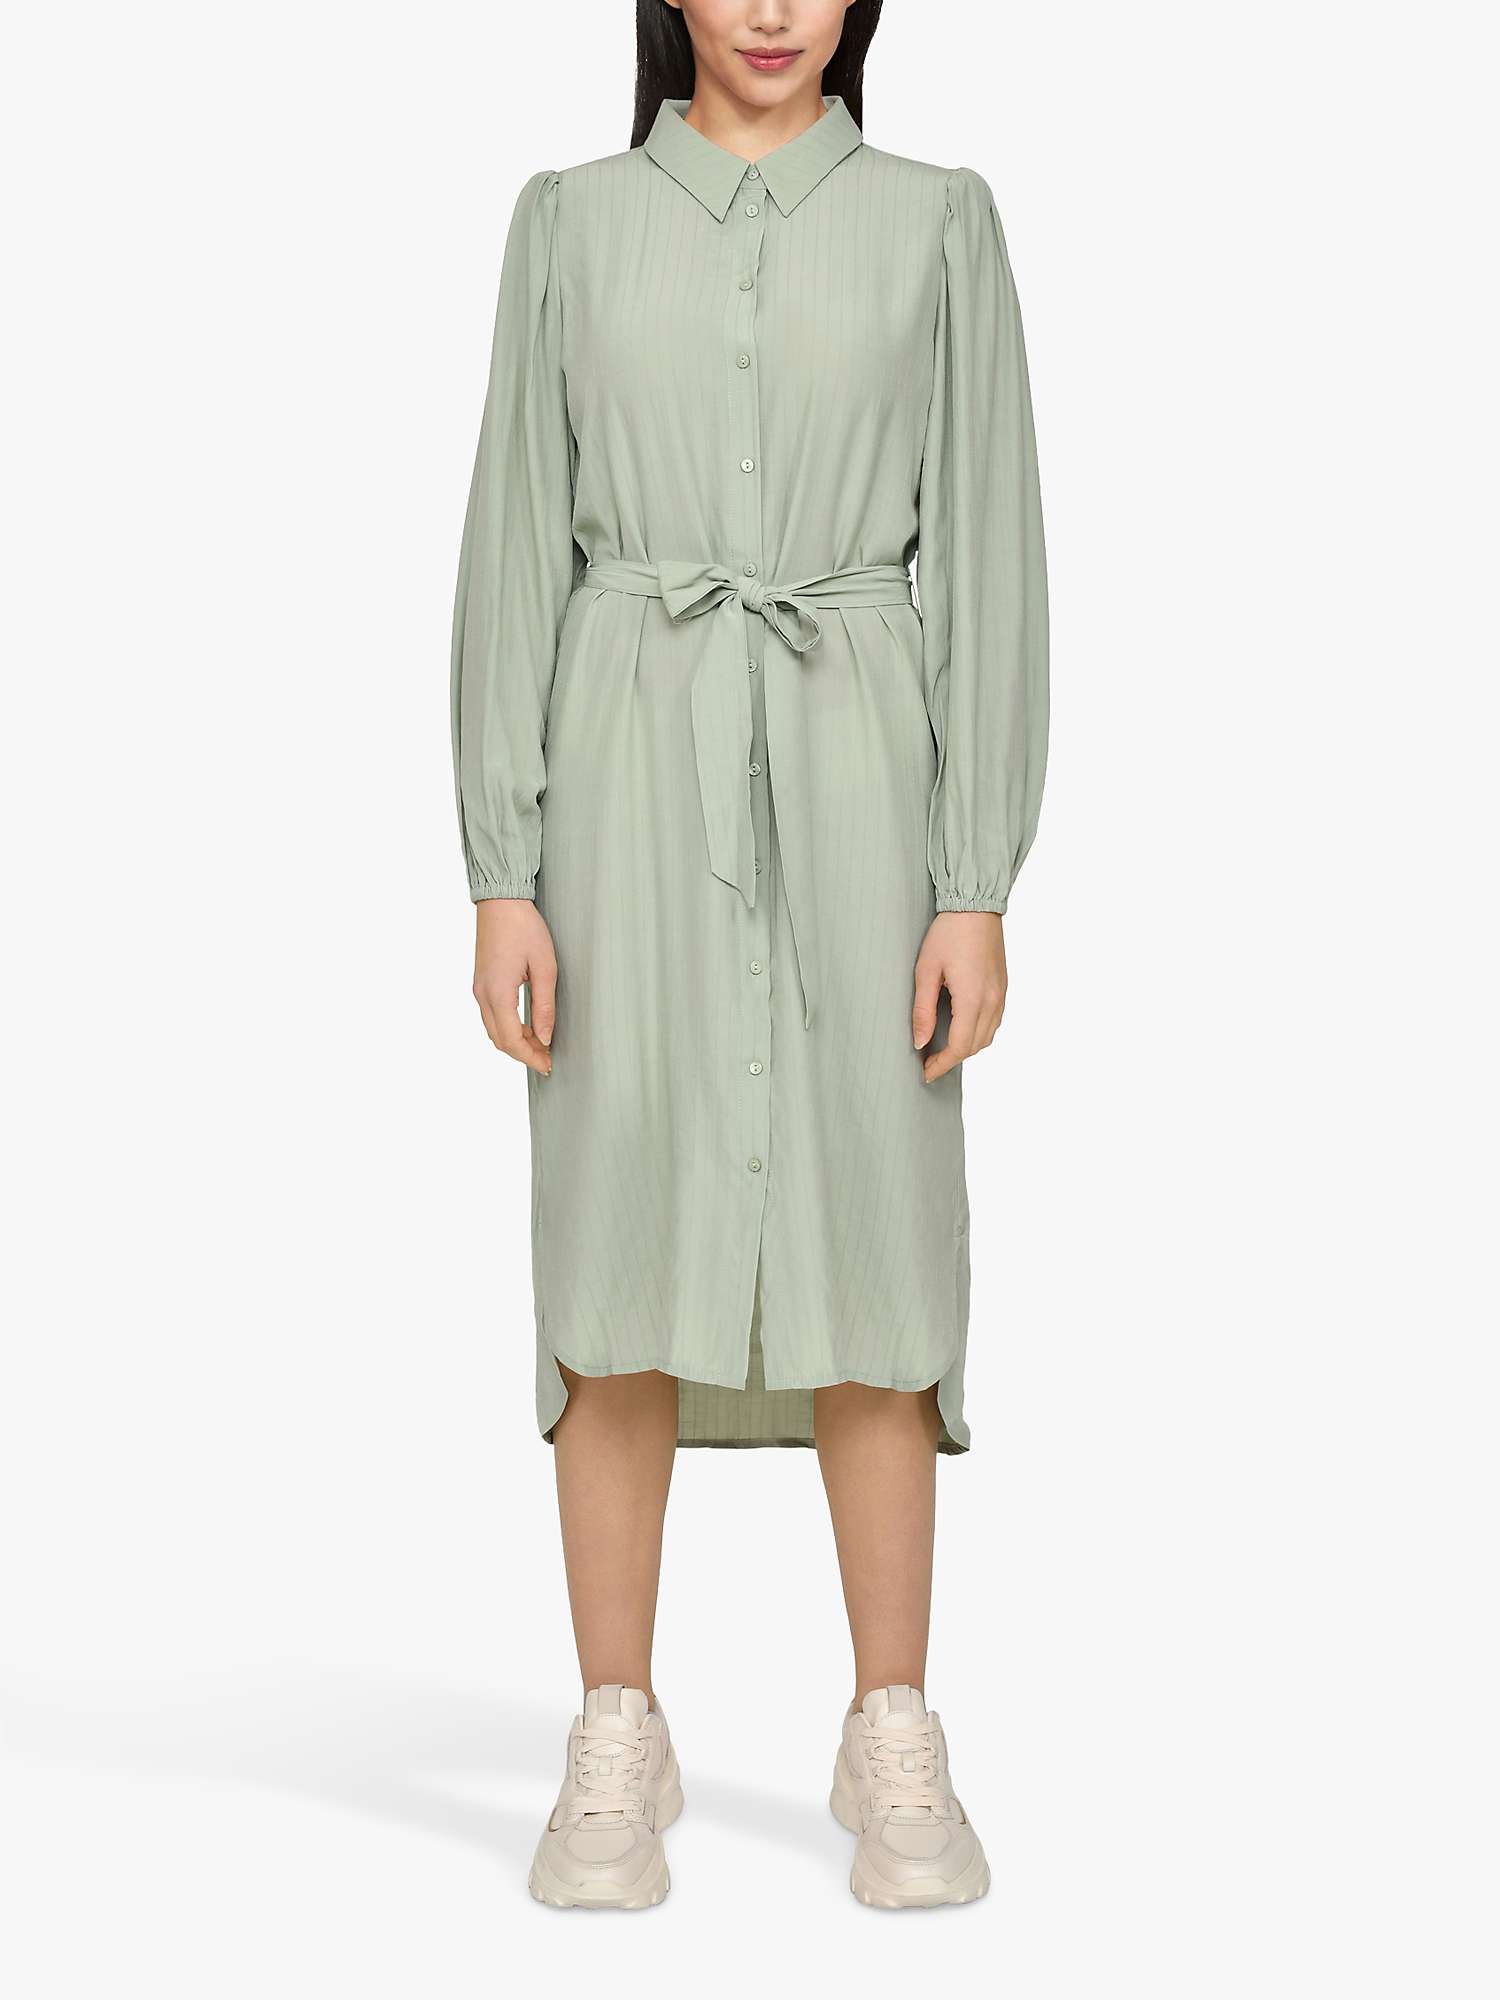 Buy Sisters Point Casual Look Shirt Dress Online at johnlewis.com